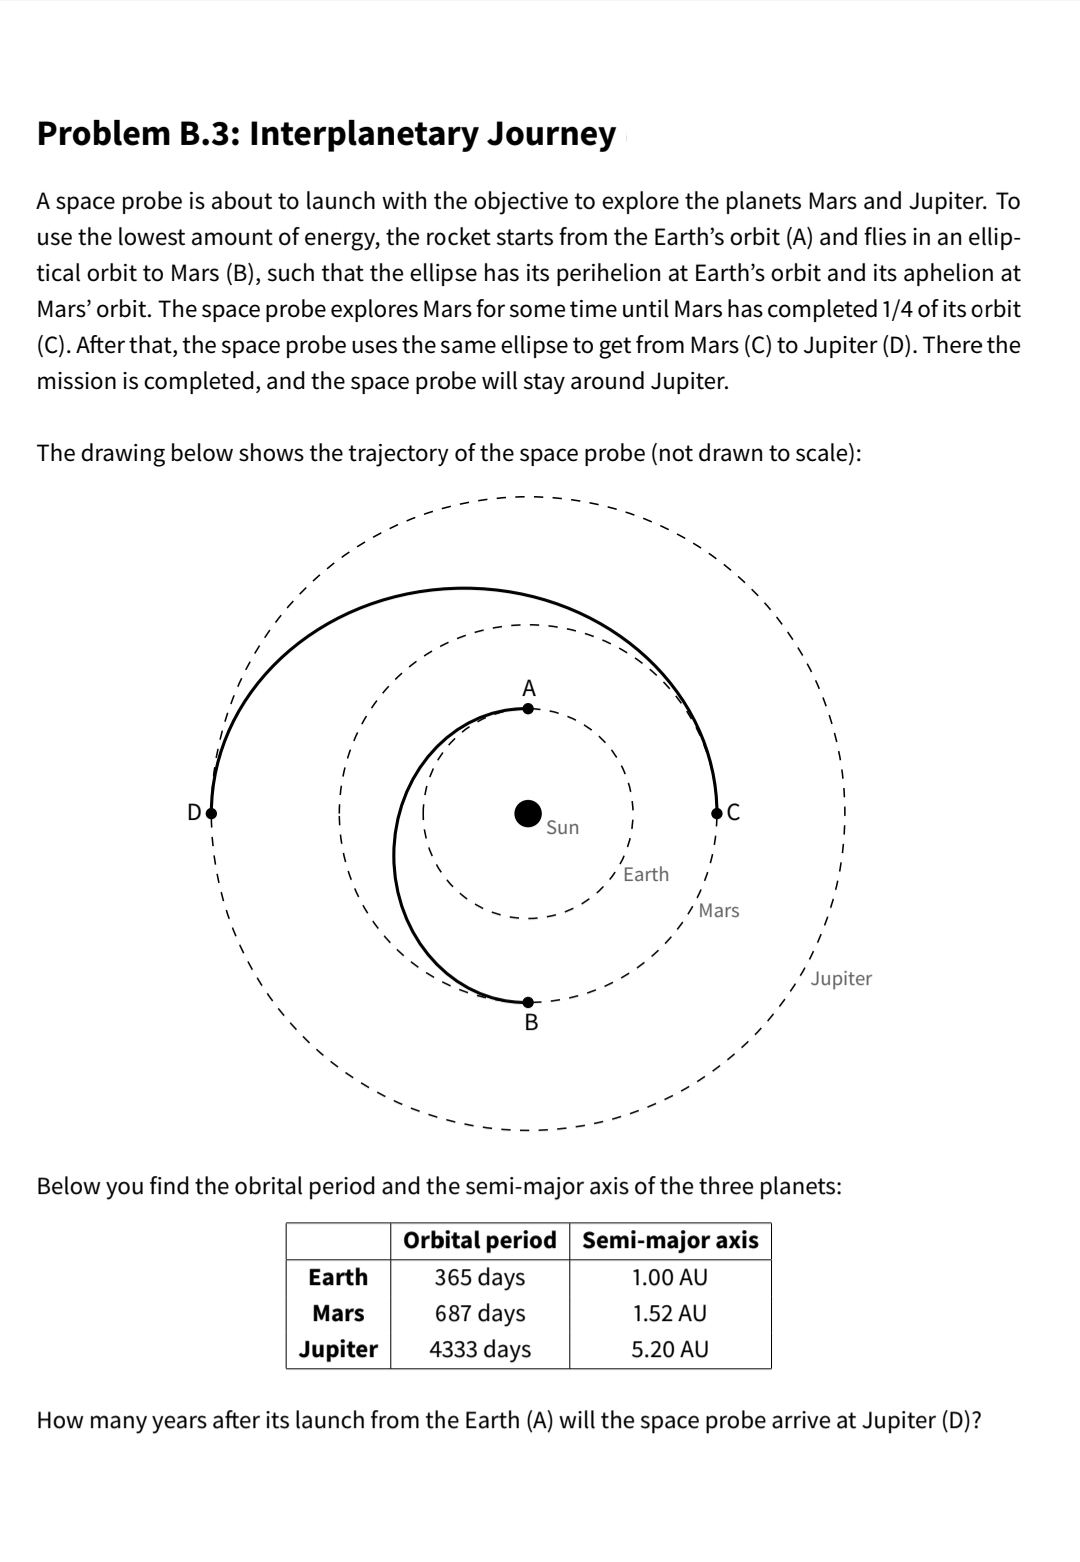 Problem B.3: Interplanetary Journey
A
space probe is about to launch with the objective to explore the planets Mars and Jupiter. To
use the lowest amount of energy, the rocket starts from the Earth's orbit (A) and flies in an ellip-
tical orbit to Mars (B), such that the ellipse has its perihelion at Earth's orbit and its aphelion at
Mars' orbit. The space probe explores Mars for some time until Mars has completed 1/4 of its orbit
(C). After that, the space probe uses the same ellipse to get from Mars (C) to Jupiter (D). There the
mission is completed, and the space probe will stay around Jupiter.
The drawing below shows the trajectory of the space probe (not drawn to scale):
A
Sun
/ Earth
Mars
Jupiter
Below
you
find the obrital period and the semi-major axis of the three planets:
Orbital period Semi-major axis
365 days
Earth
1.00 AU
Mars
687 days
1.52 AU
Jupiter
4333 days
5.20 AU
How many years after its launch from the Earth (A) will the space probe arrive at Jupiter (D)?
